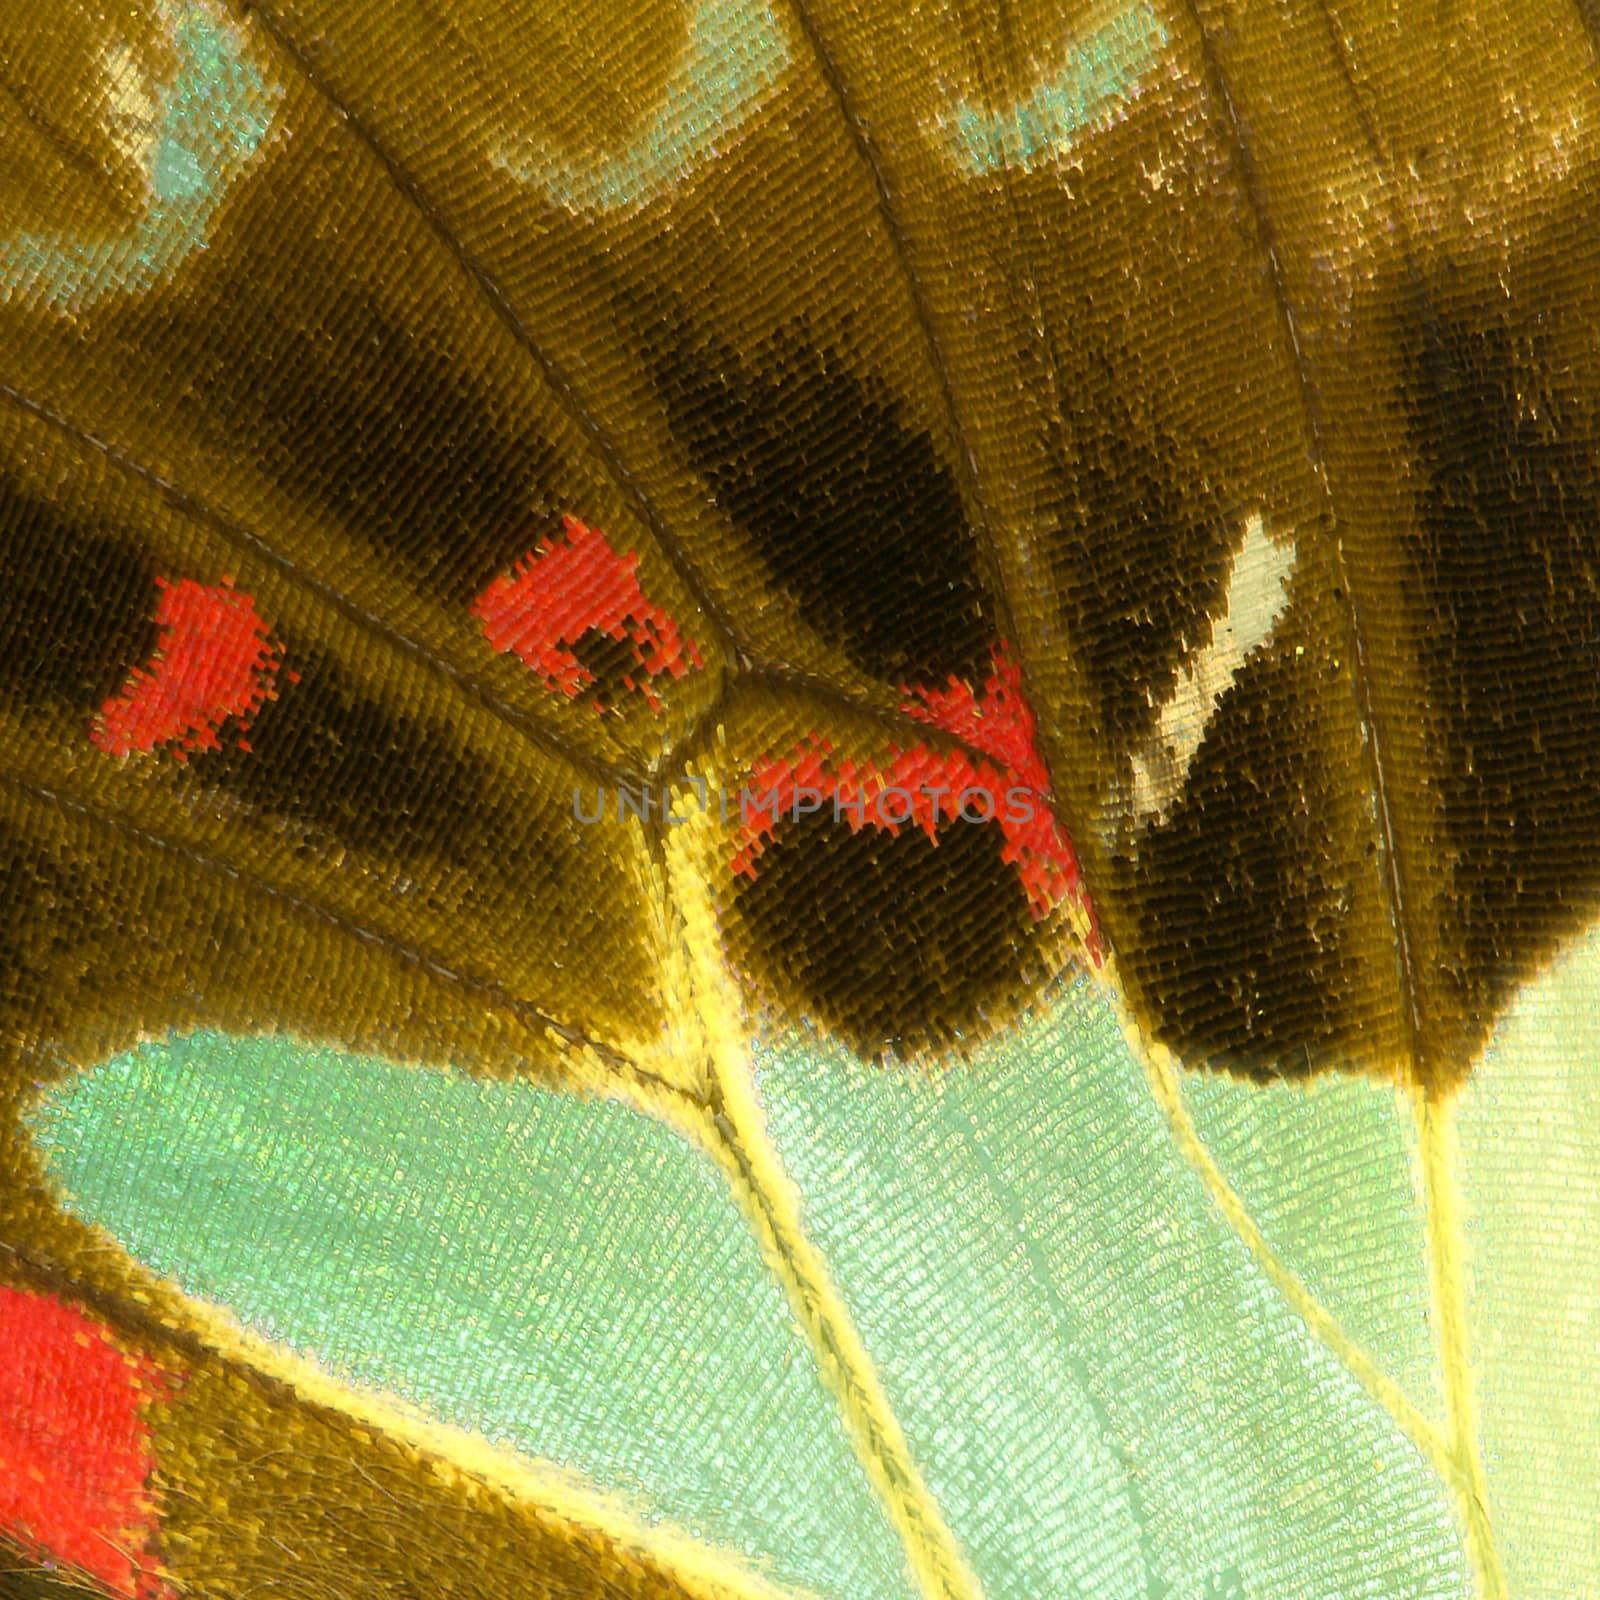 Butterfly wing texture, close up of detail of butterfly wing for background 